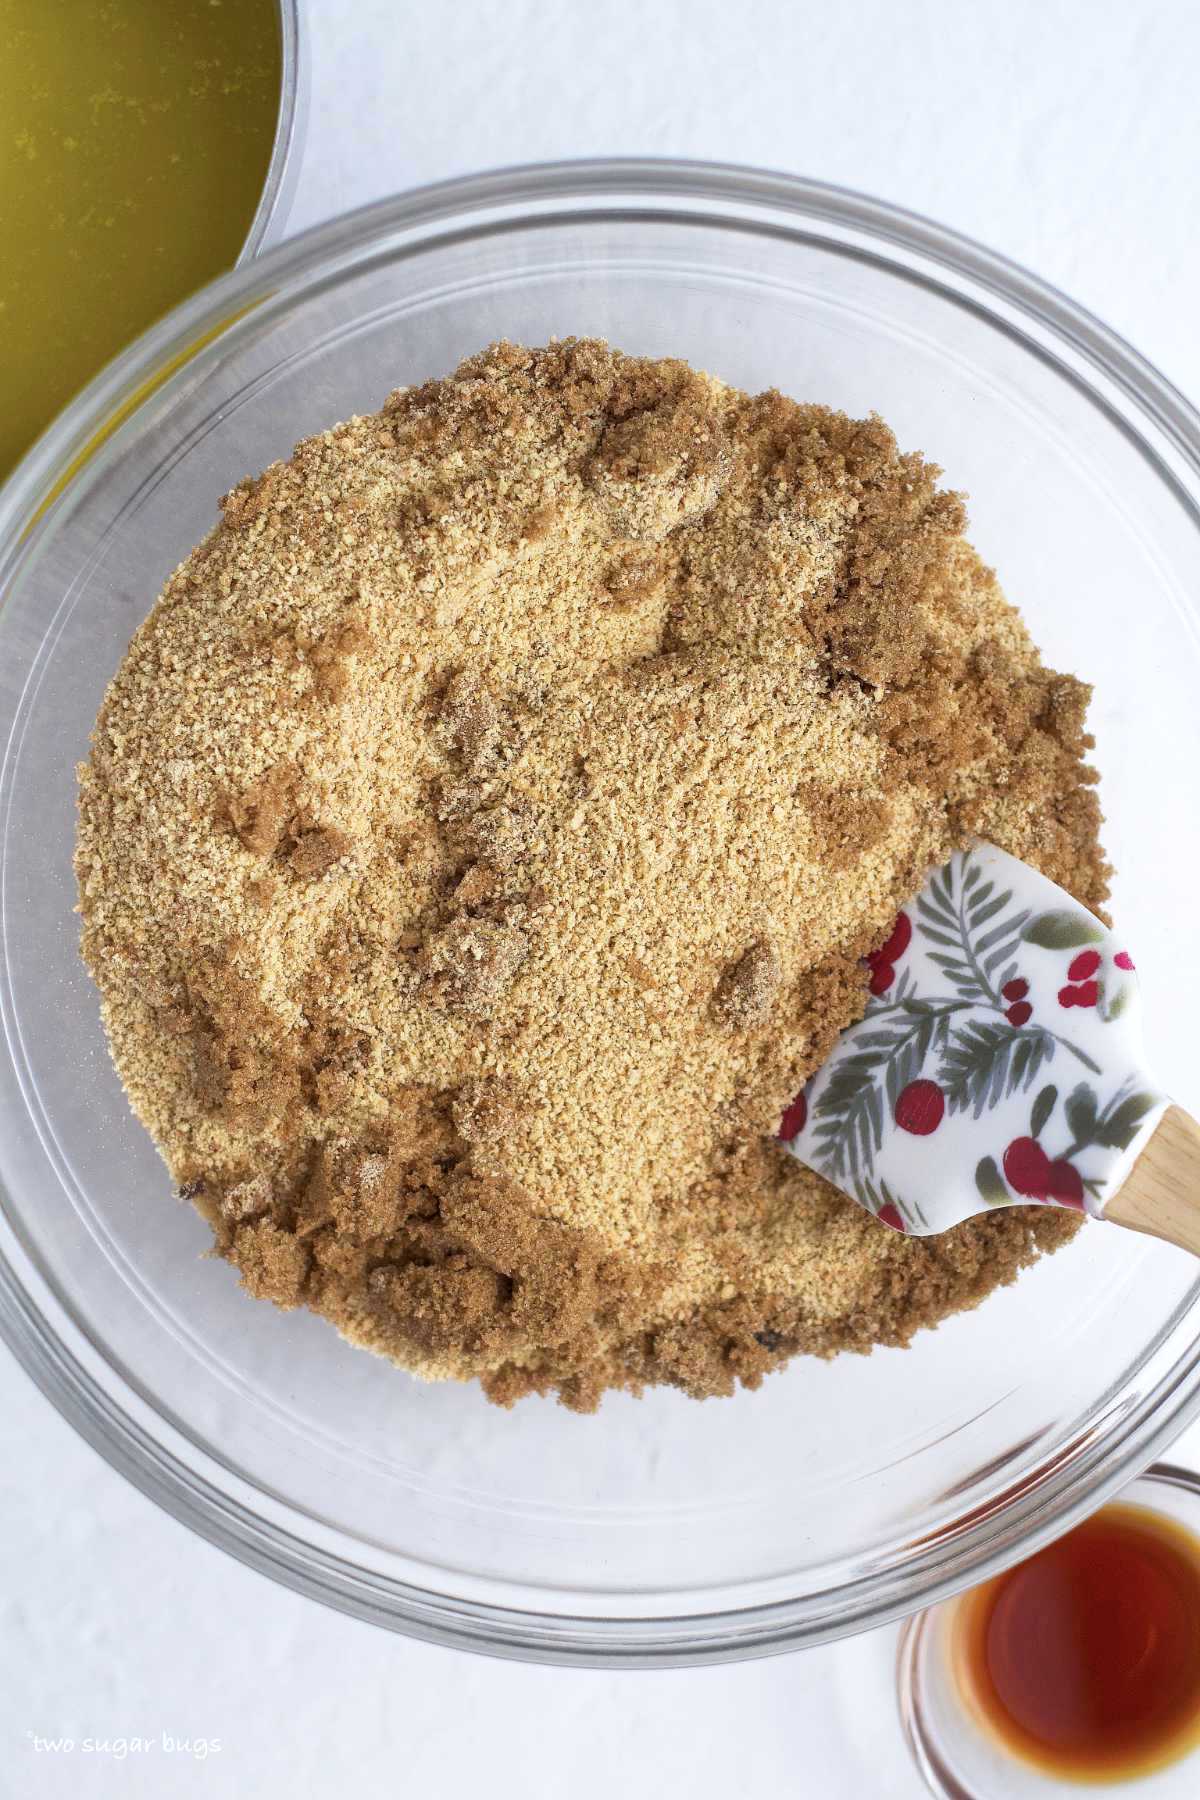 brown sugar and graham cracker crumbs in a bowl